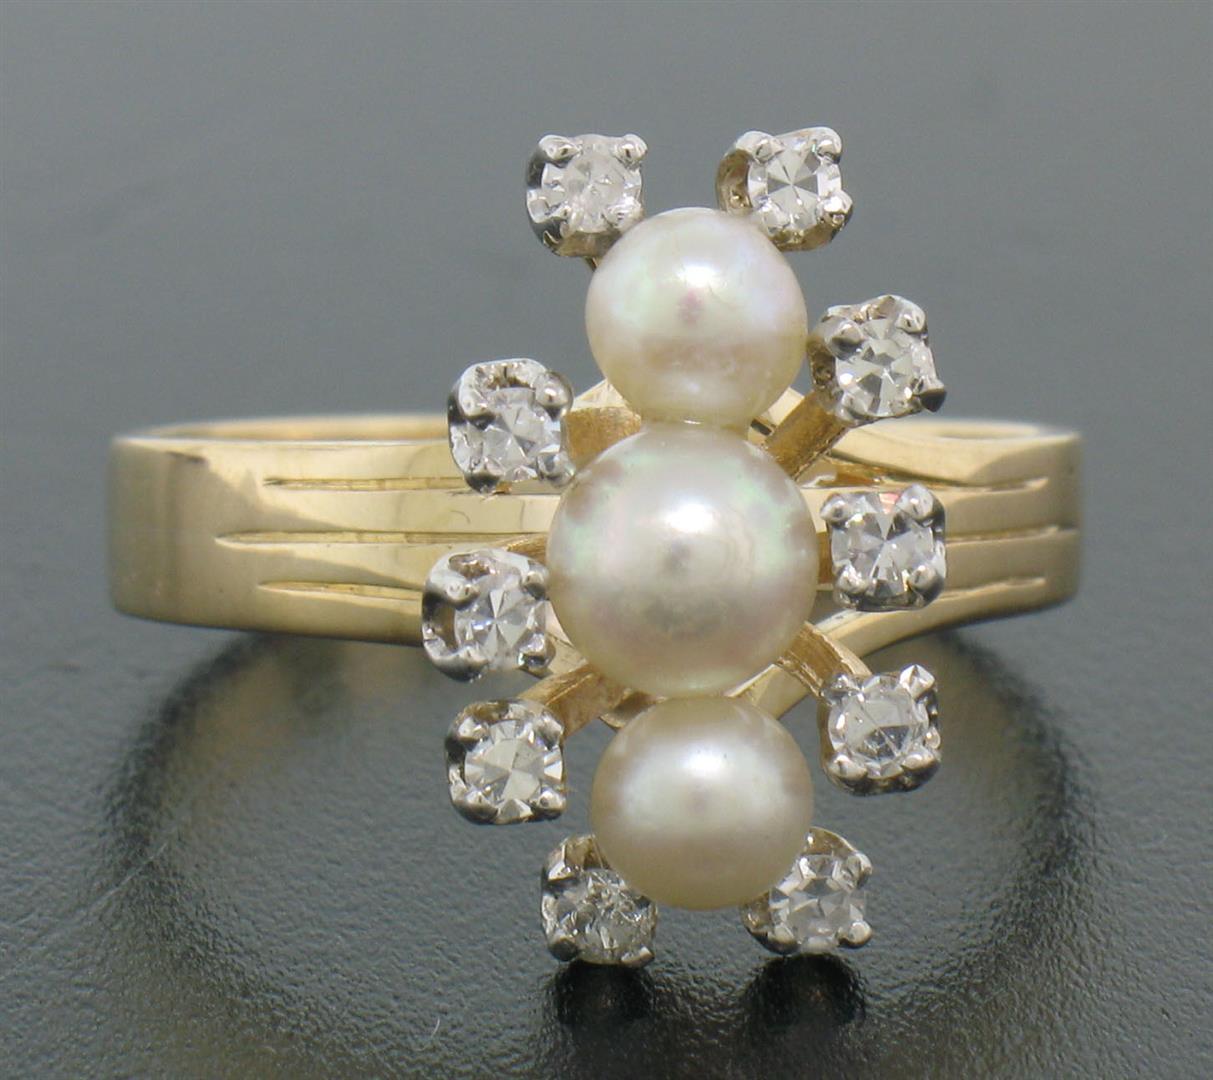 Vintage 14k Yellow Gold Pearl Diamond Accents Halo Elongated Dinner Ring Sz 7.5